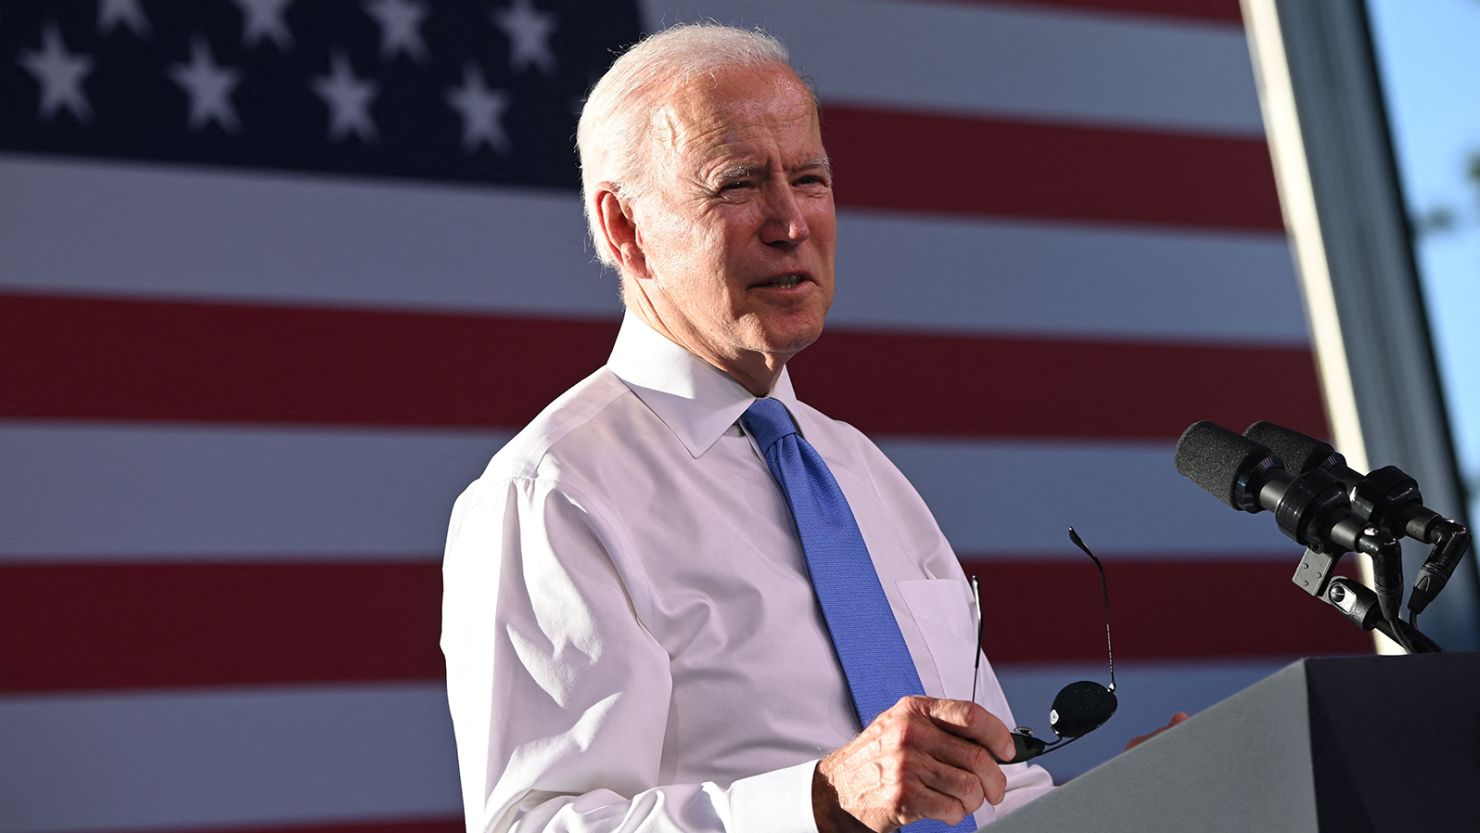 President Joe Biden holds a press conference after the US-Russia summit in Geneva on June 16, 2021.